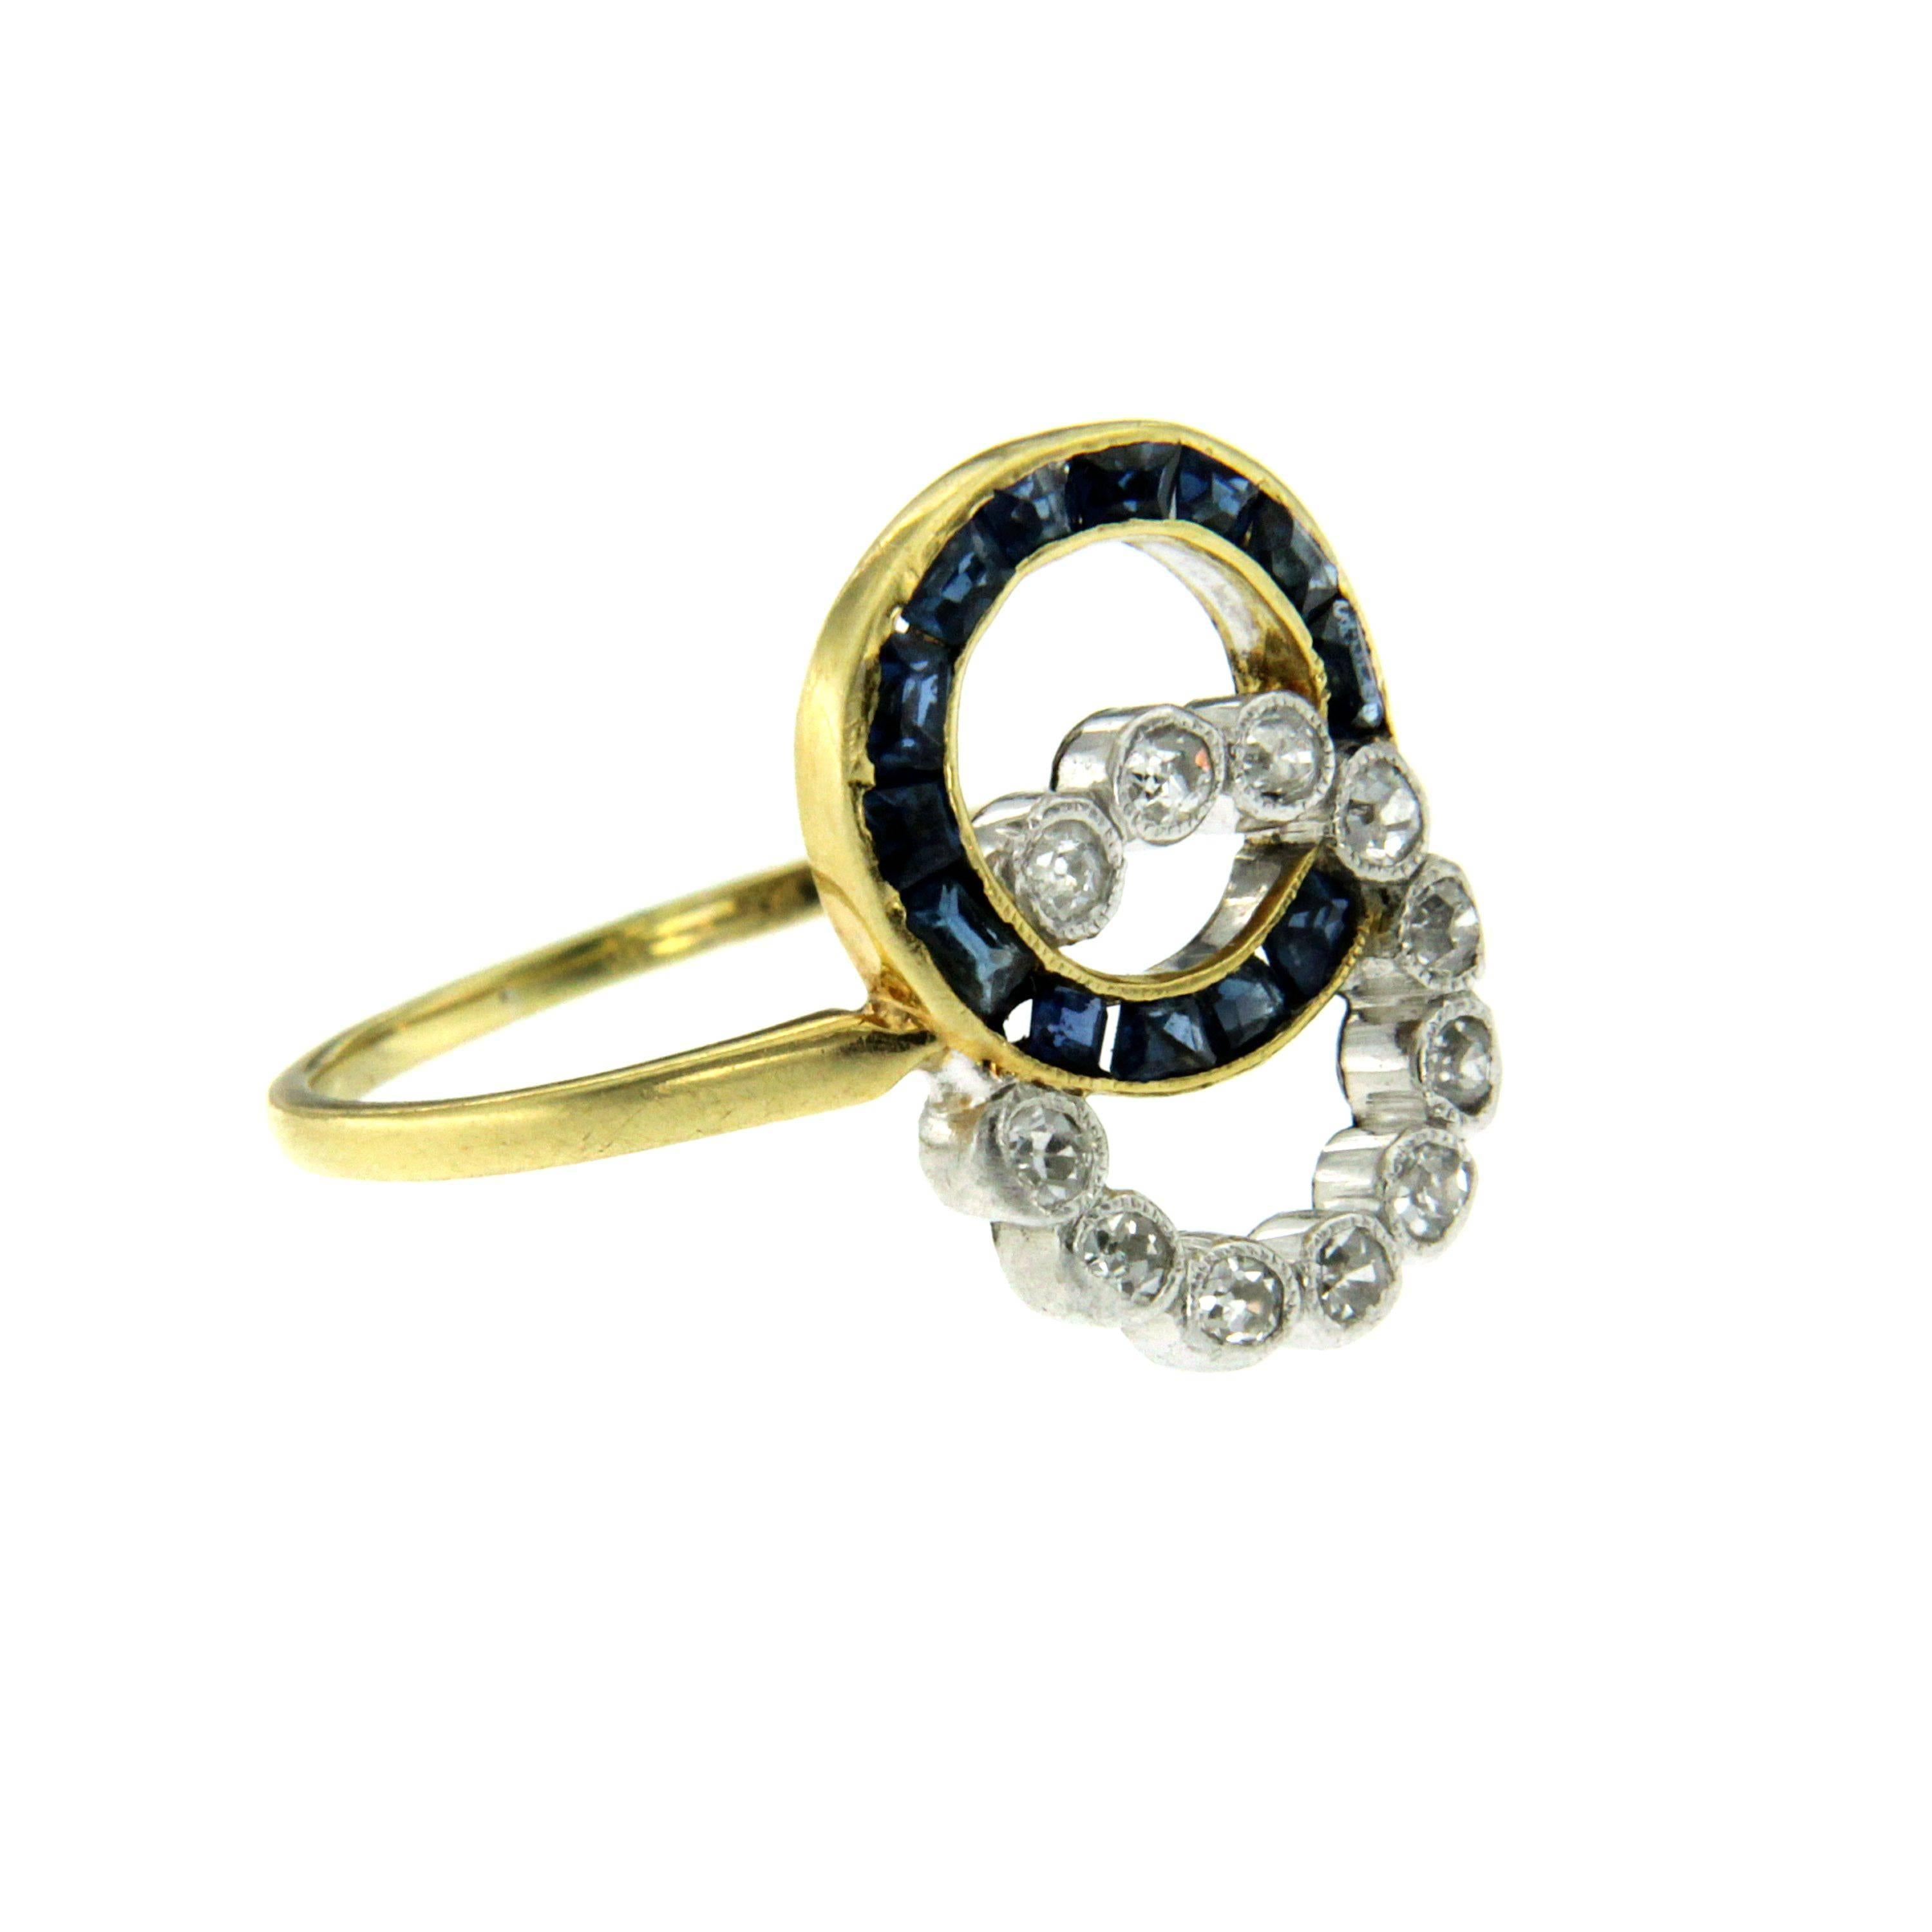 A gorgeous Art Deco 18k yellow gold double hoop ring set with custom cut sapphires weighing approx. 0.50 ct. and old mine cut diamonds weighing 0.25ct. G color VVS. Circa 1930

CONDITION: Pre-owned - Excellent 
METAL: 18k White Gold 
GEM STONE: